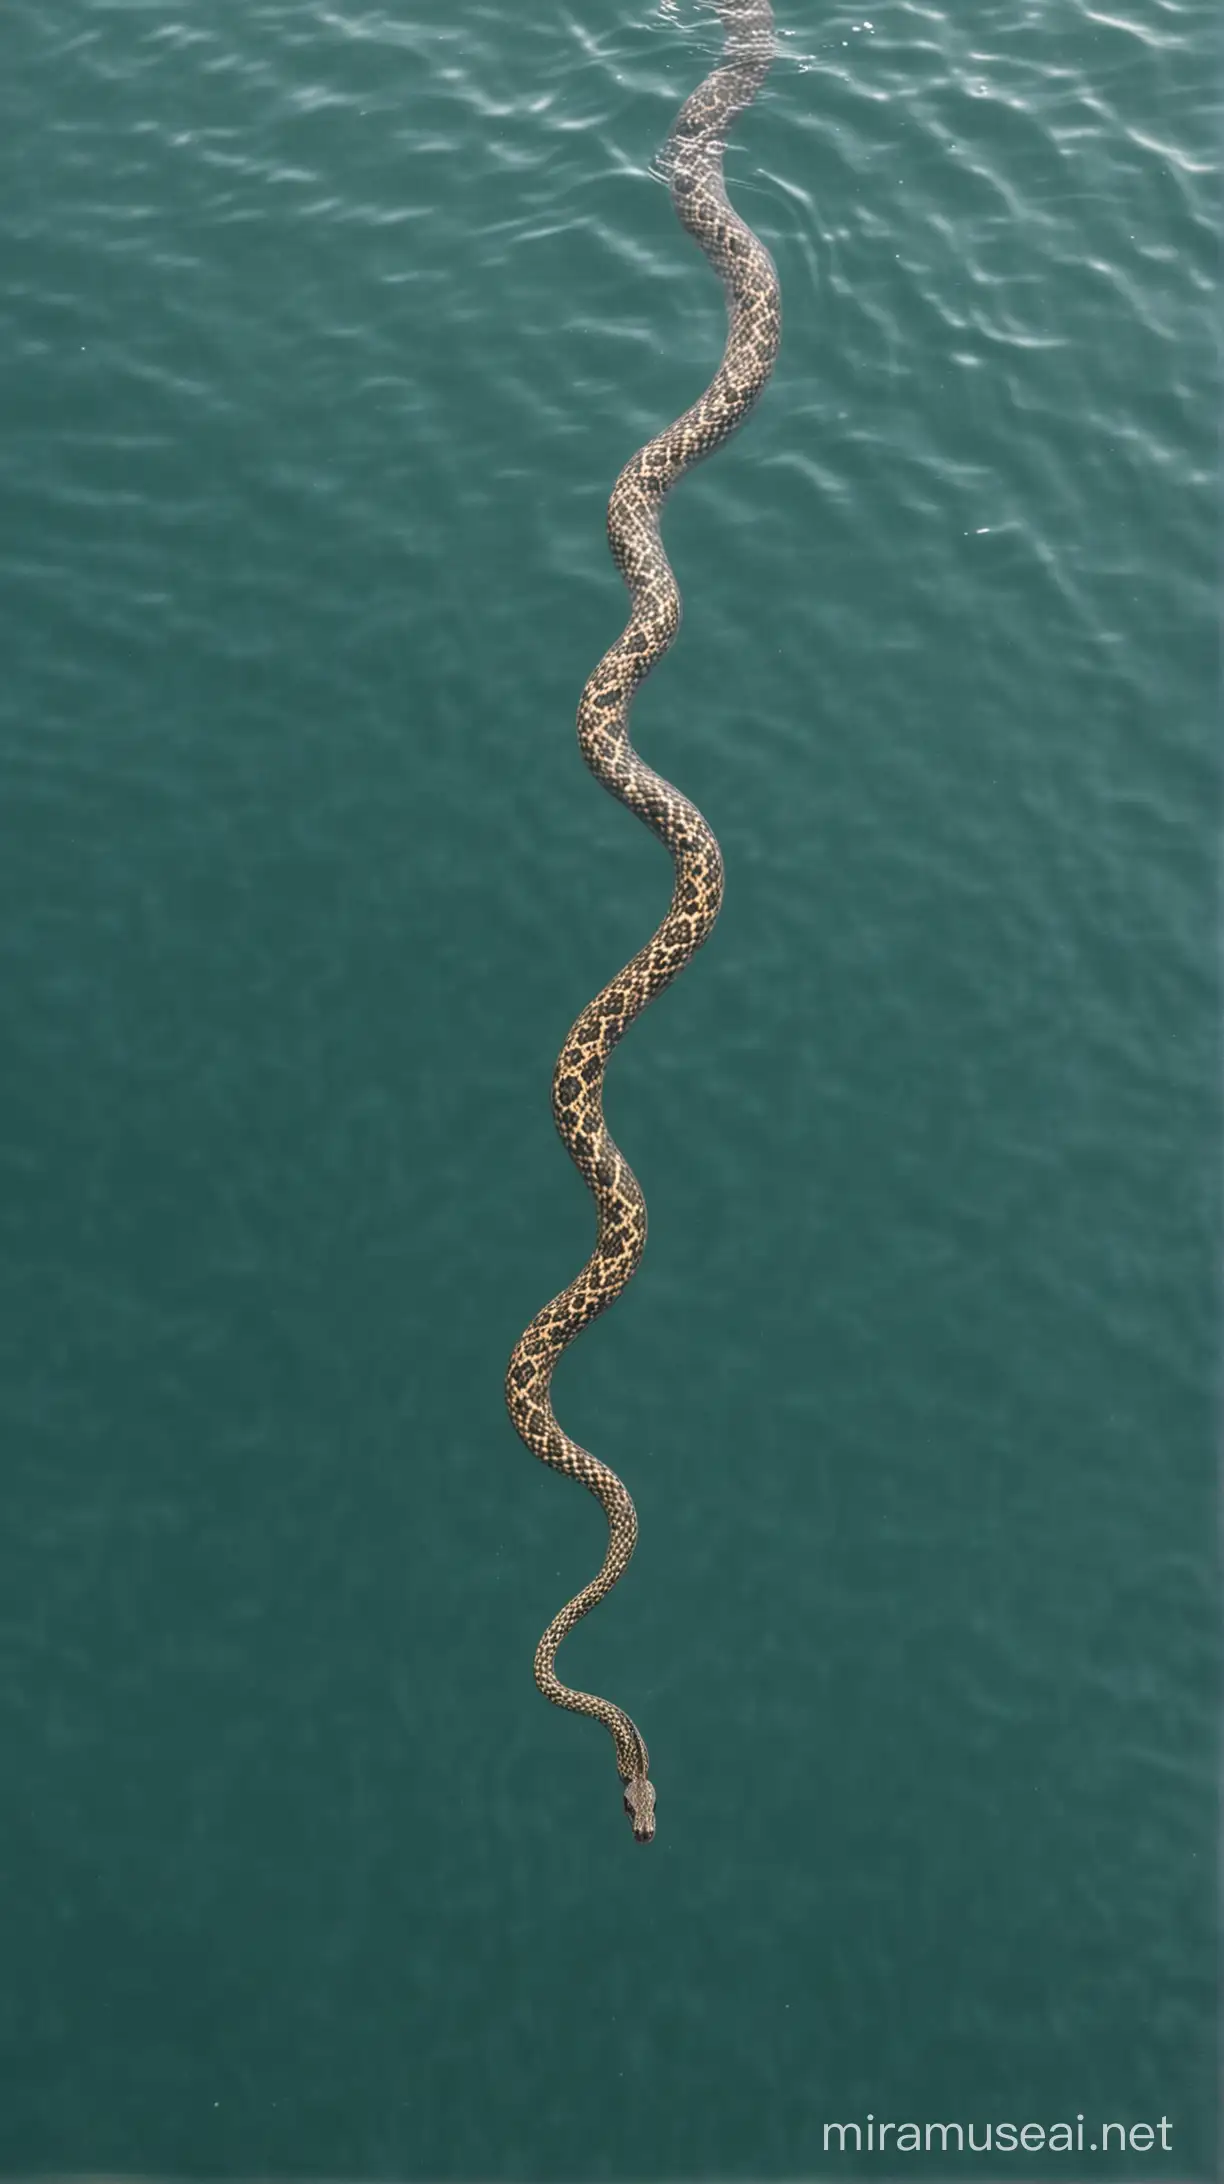 Snake on water swim in the middle of sea,look from sky